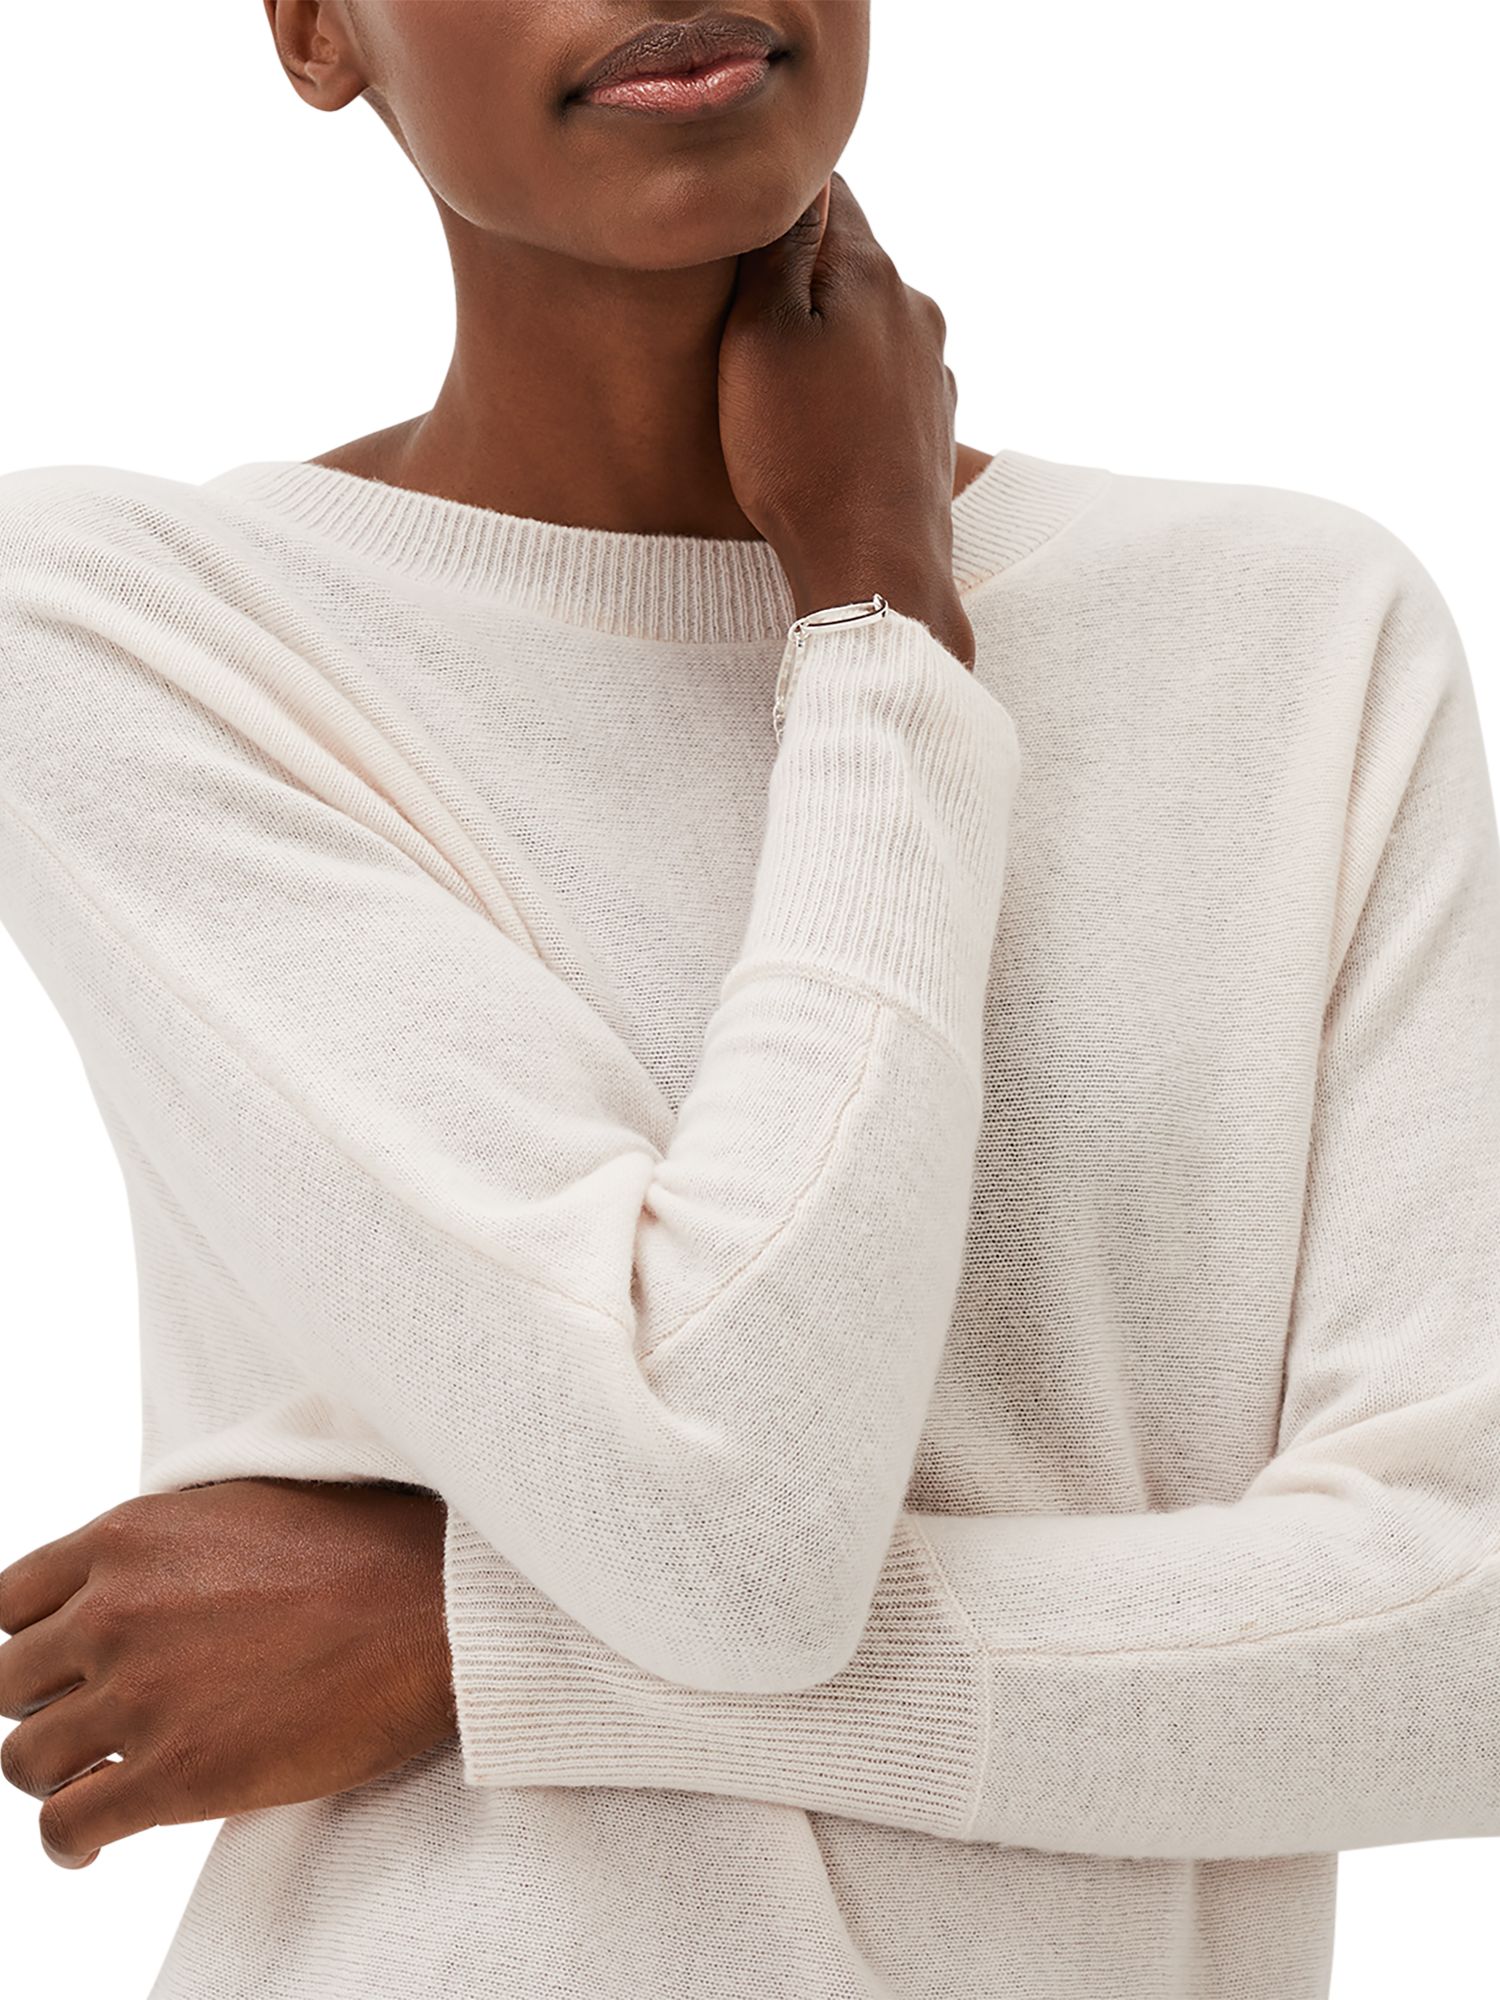 Buy Phase Eight Beatrice Cashmere Jumper Online at johnlewis.com